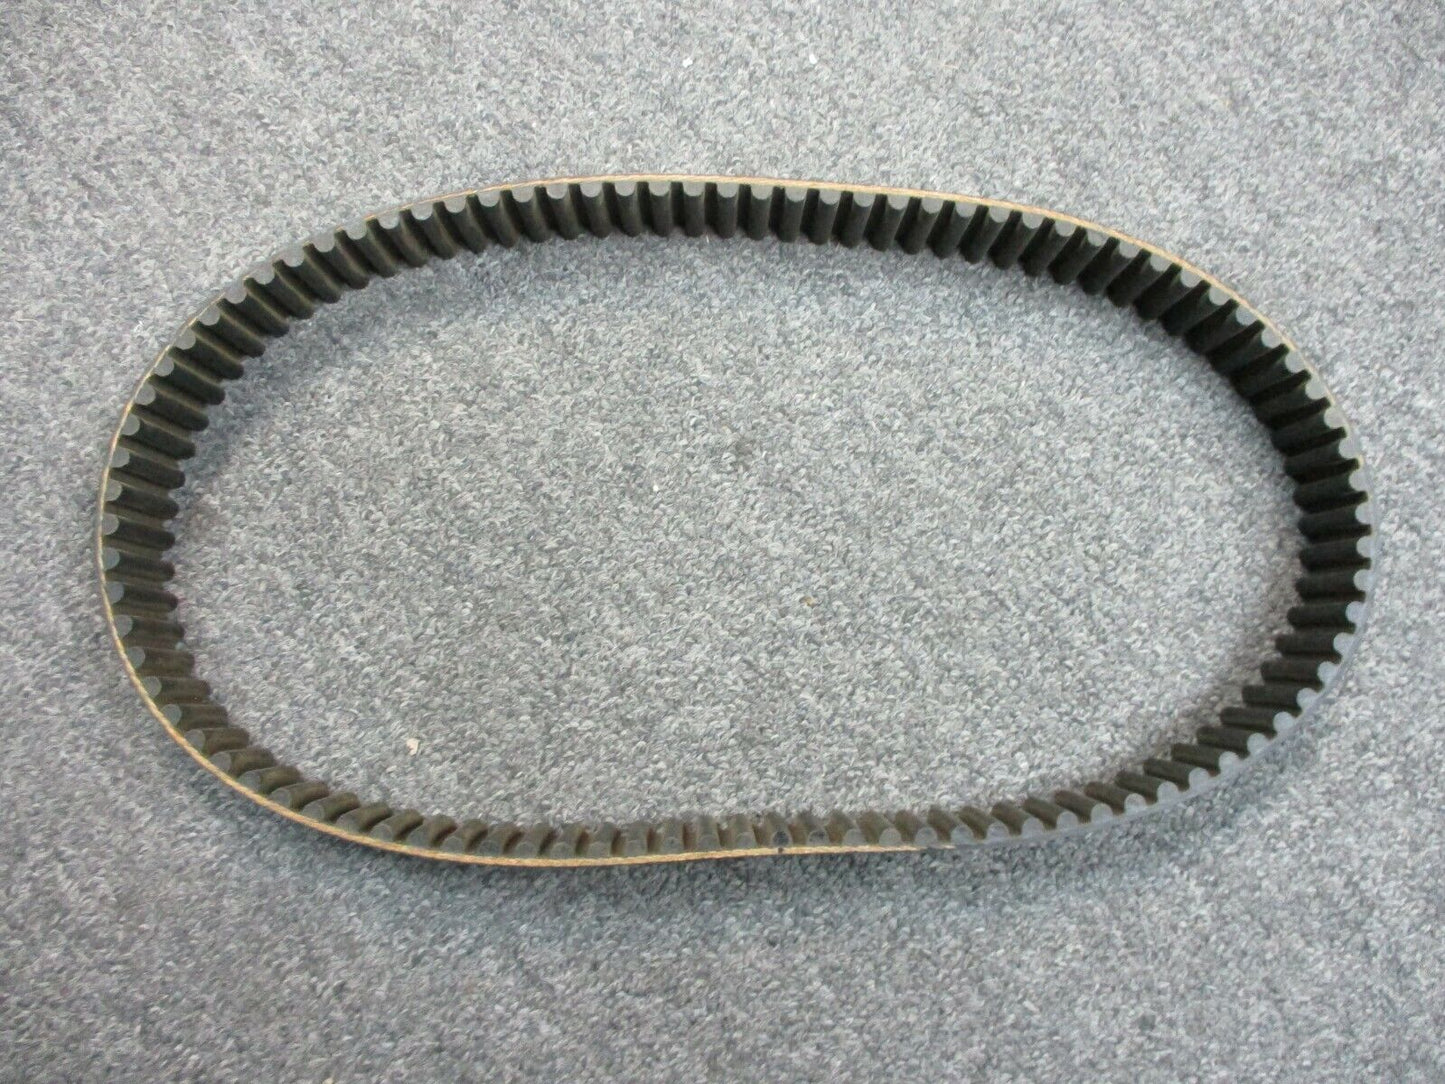 KARATA 30991 Primary Drive Belt 117 Tooth 1 1/2 Inch Wide Harley Primary Drive